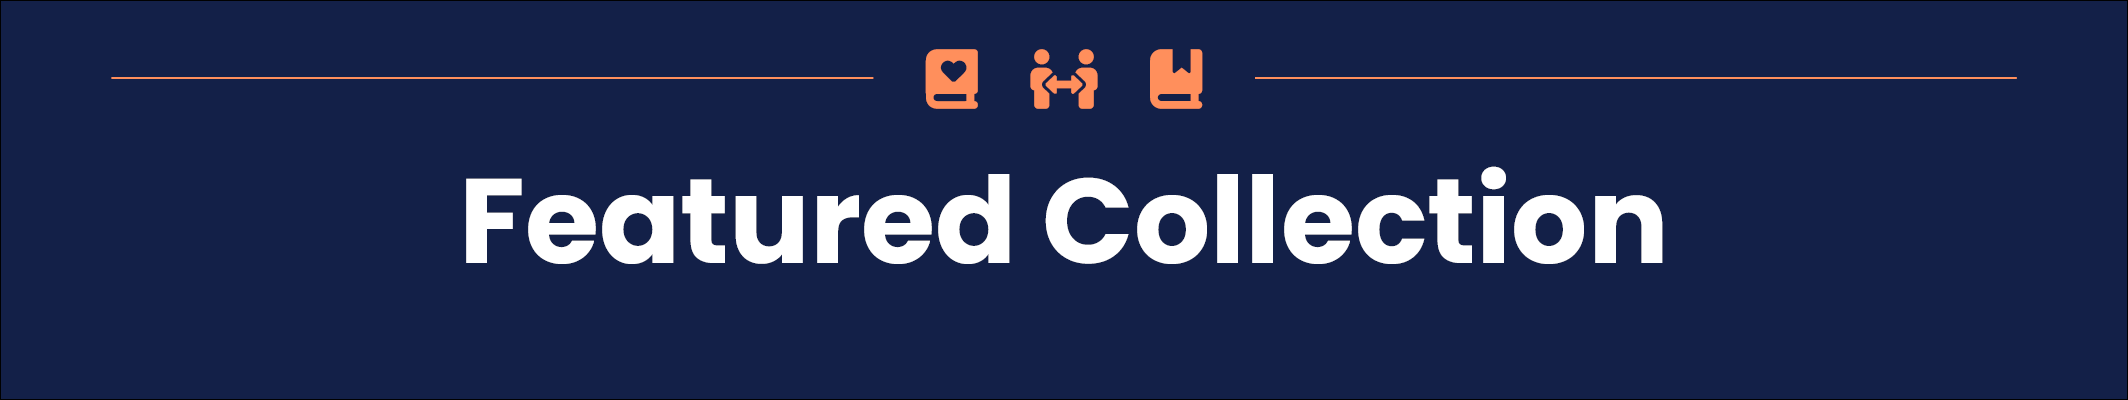 Blue background, white writing "Featured Collection". Orange icons showing people, books and taking items.